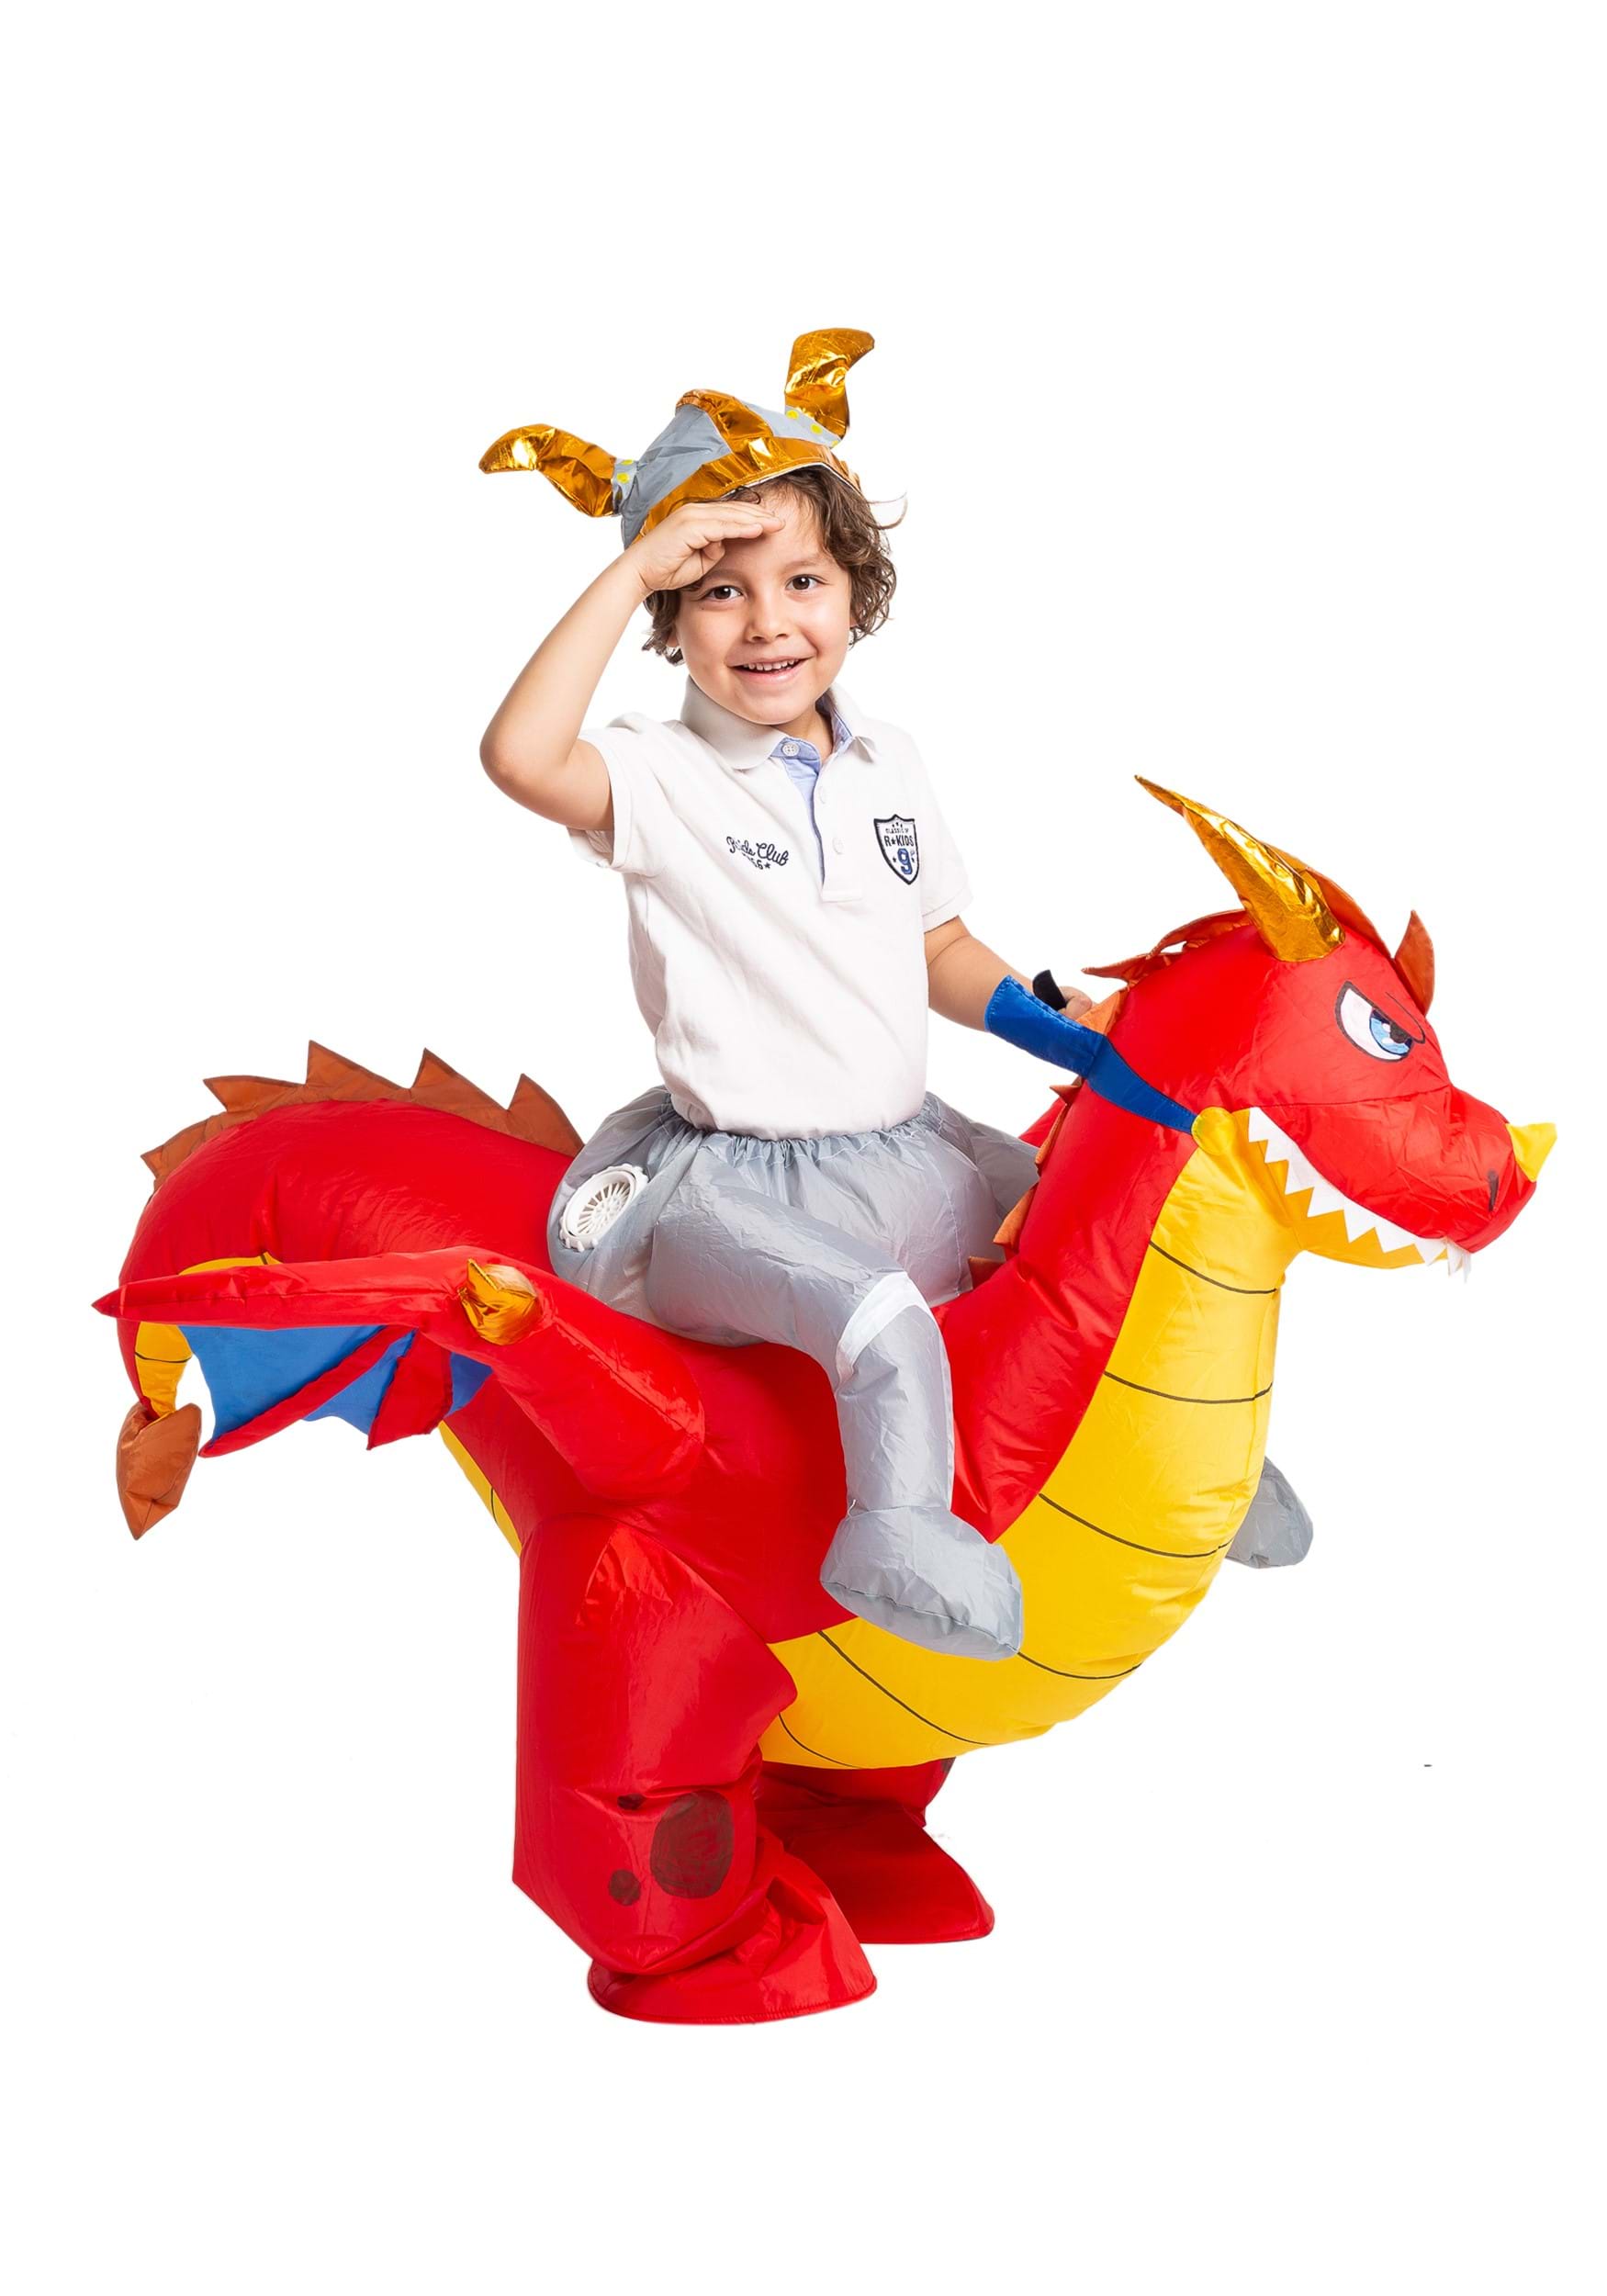 Inflatable Riding A Fire Dragon Child Costume